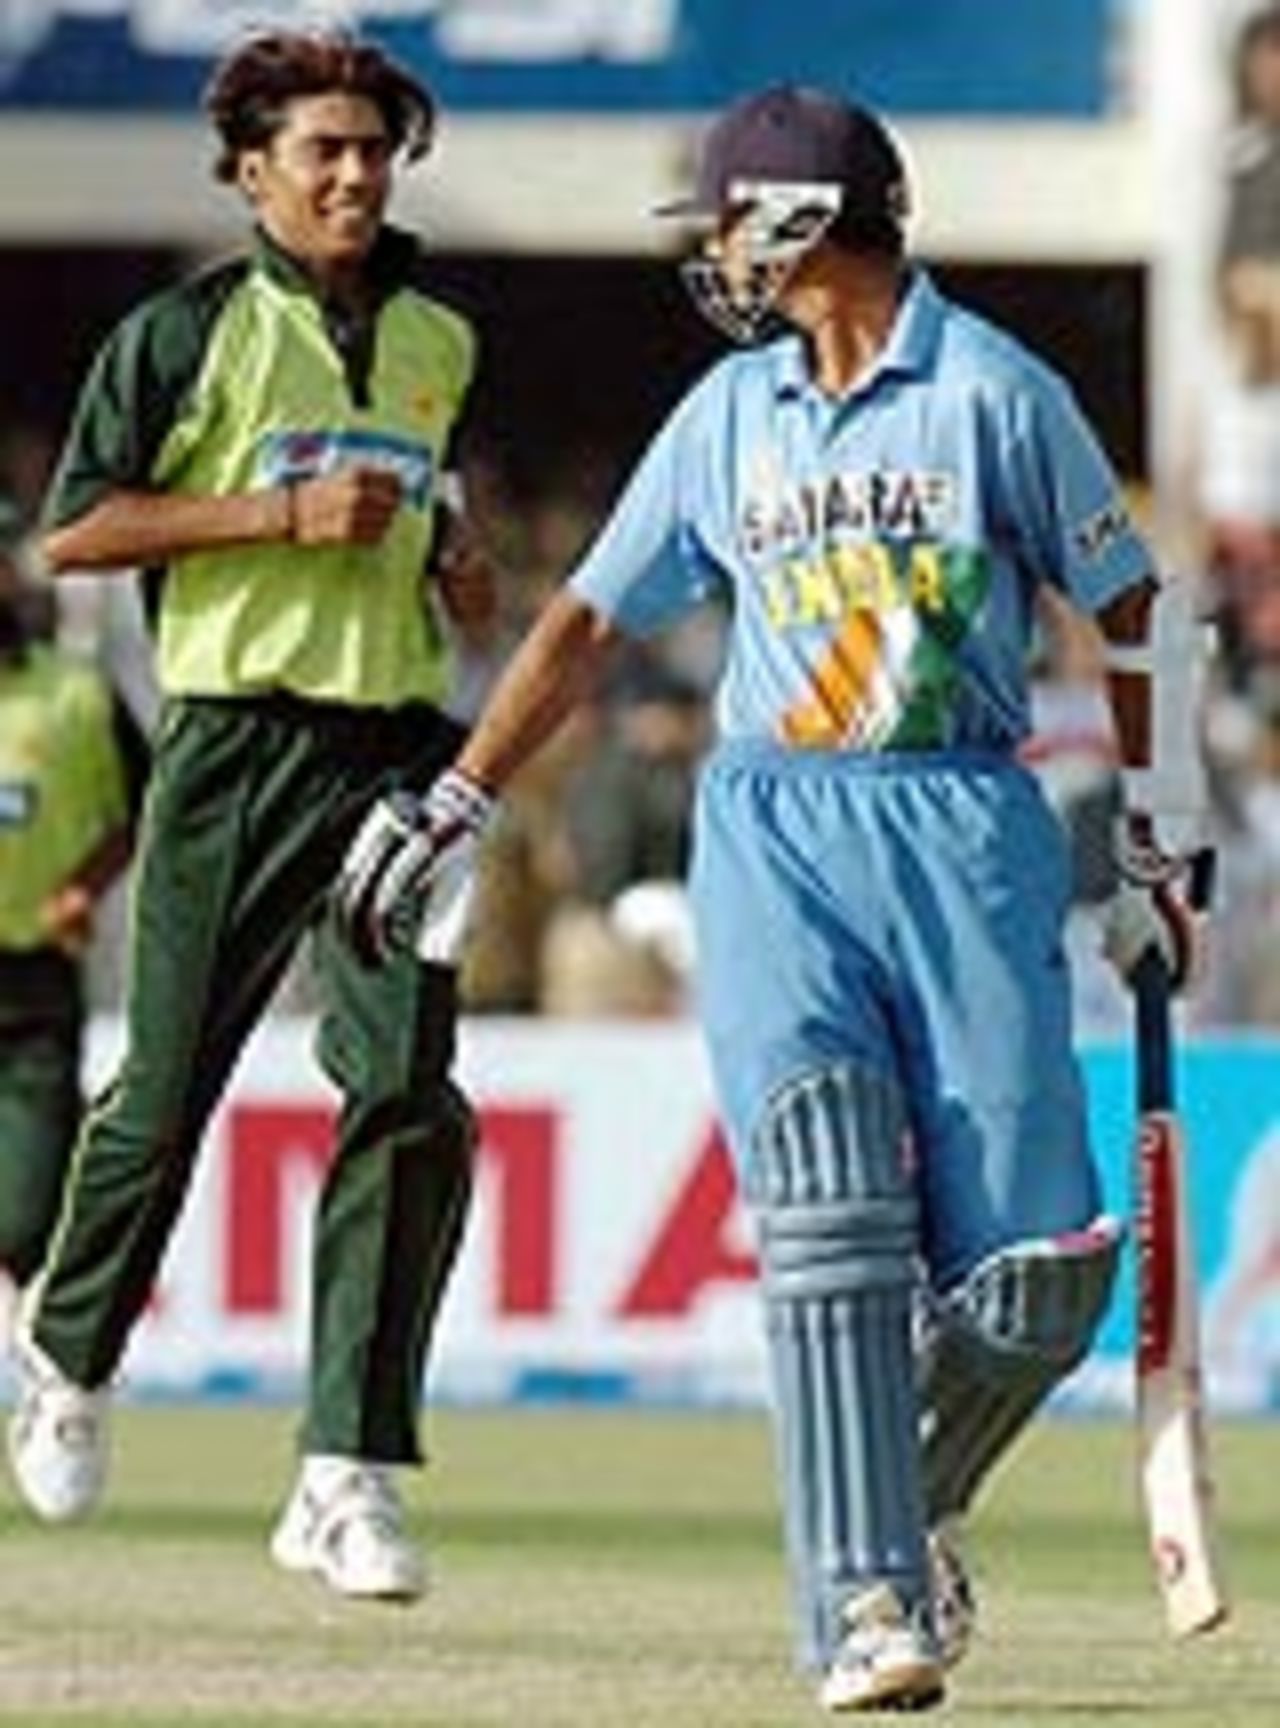 Rahul Dravid looks back at Mohammad Sami after being dismissed, Pakistan v India, 5th ODI, Lahore, March 24, 2004